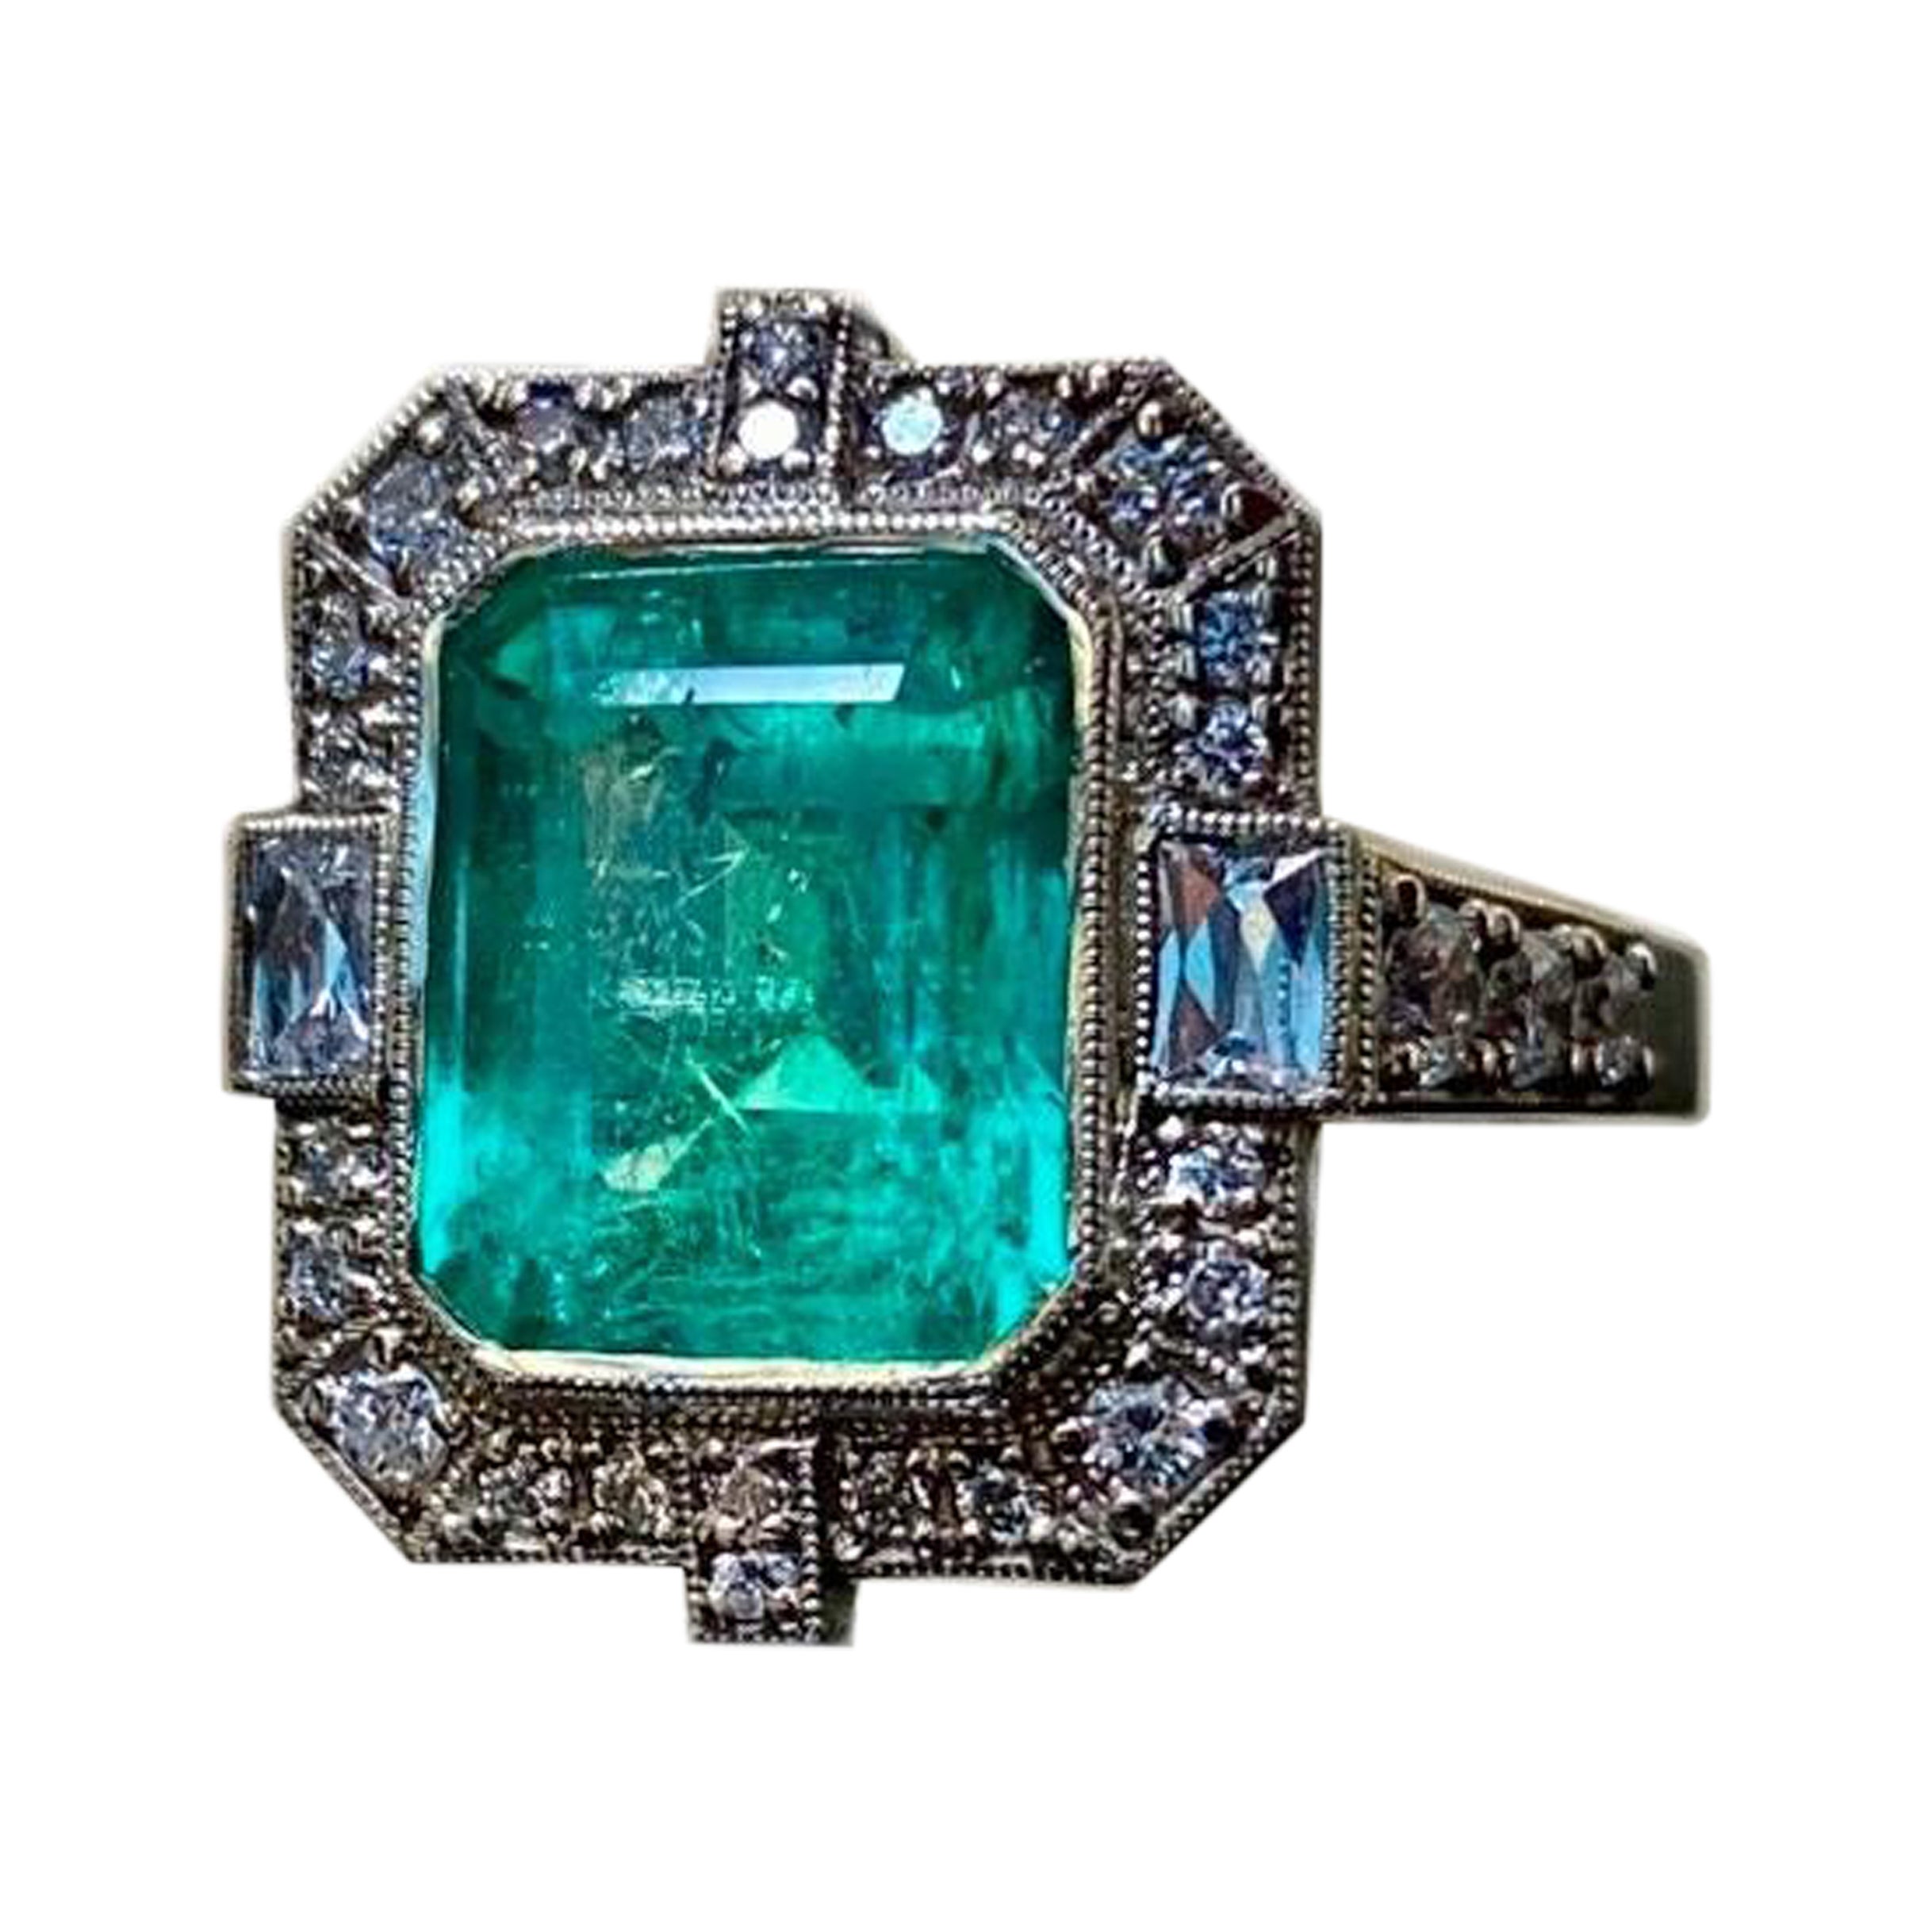 DeKara Designs Collection

Metal- 14K White Gold, .583.

Stones- 1 GIA Certified 4.60 Carat Colombian Emerald, Two Specially French Cut Damonds, 30 Round Diamonds F-G Color VS2 Clarity 0.97 Carats.

GIA Report Number 6224040218

Handmade Art Deco